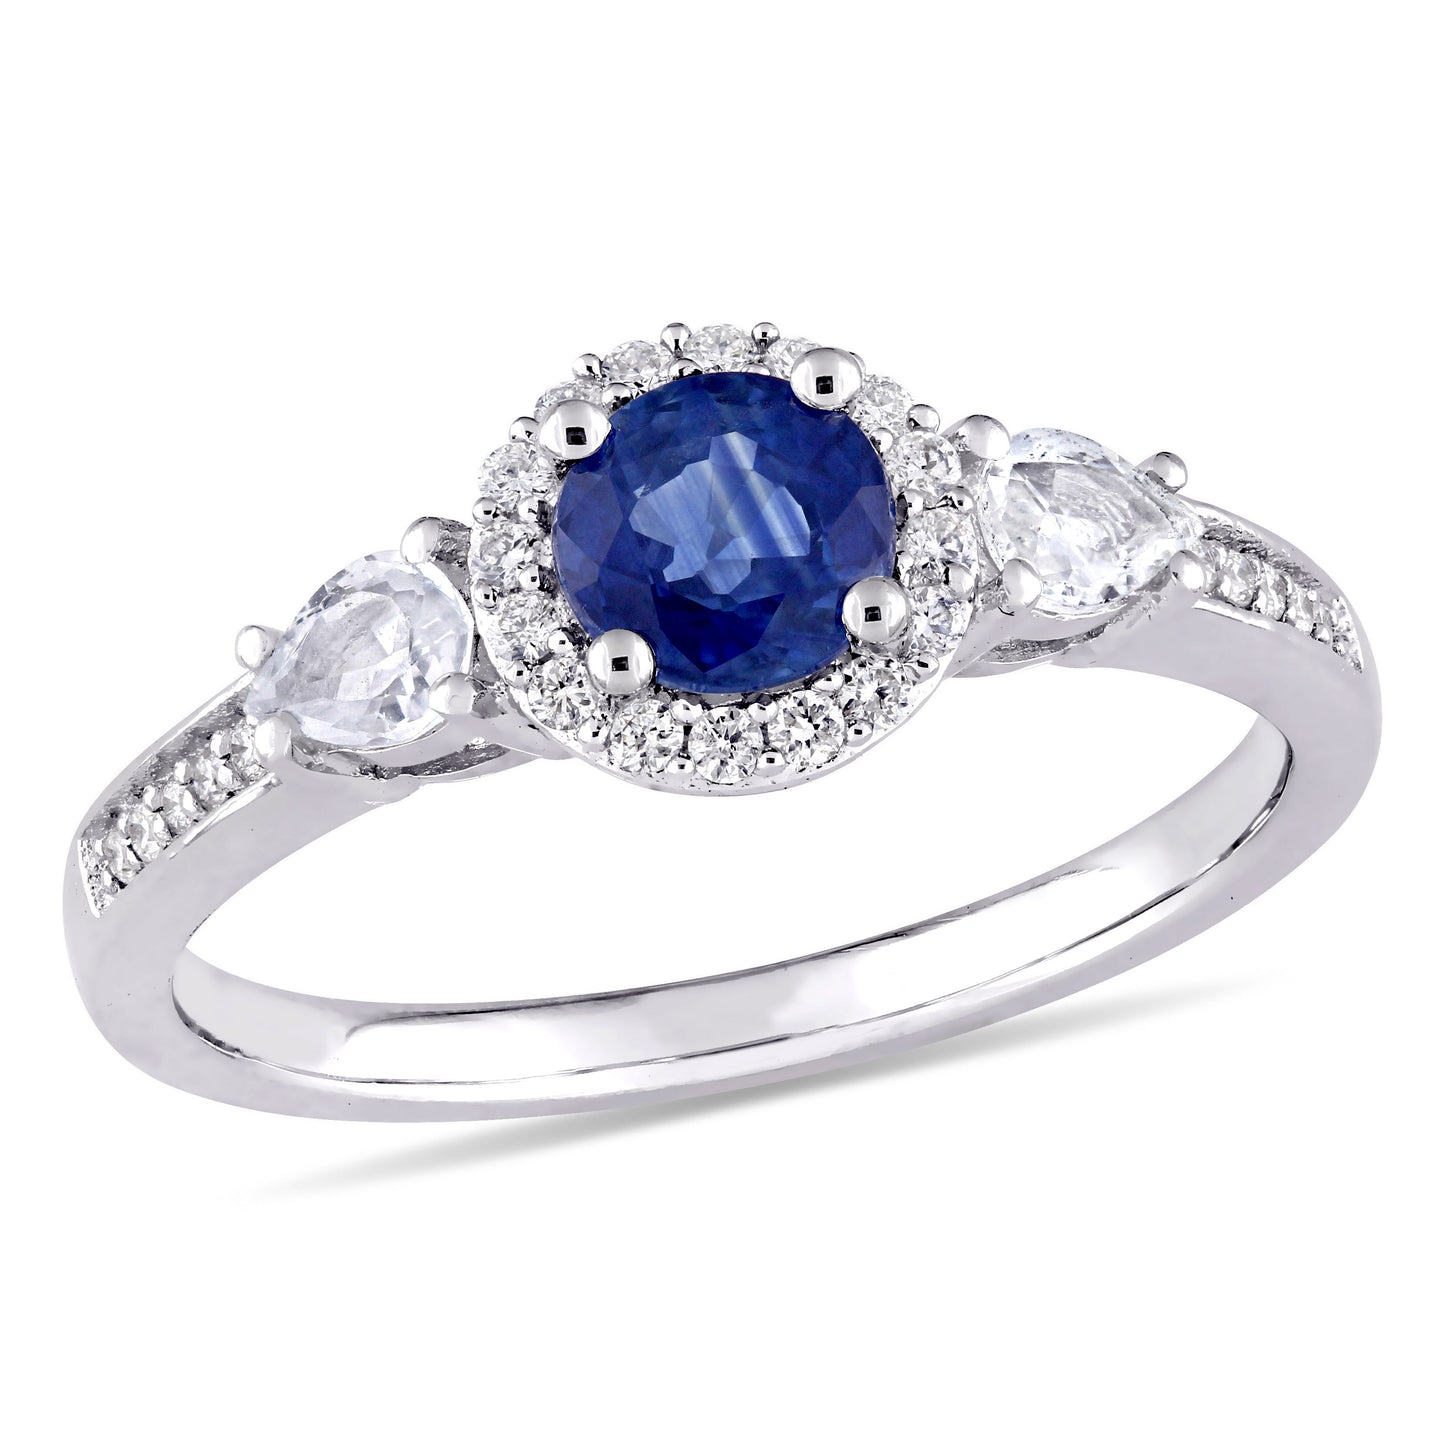 Blue & White Sapphire with Diamond Engagement Ring in 14k White Gold